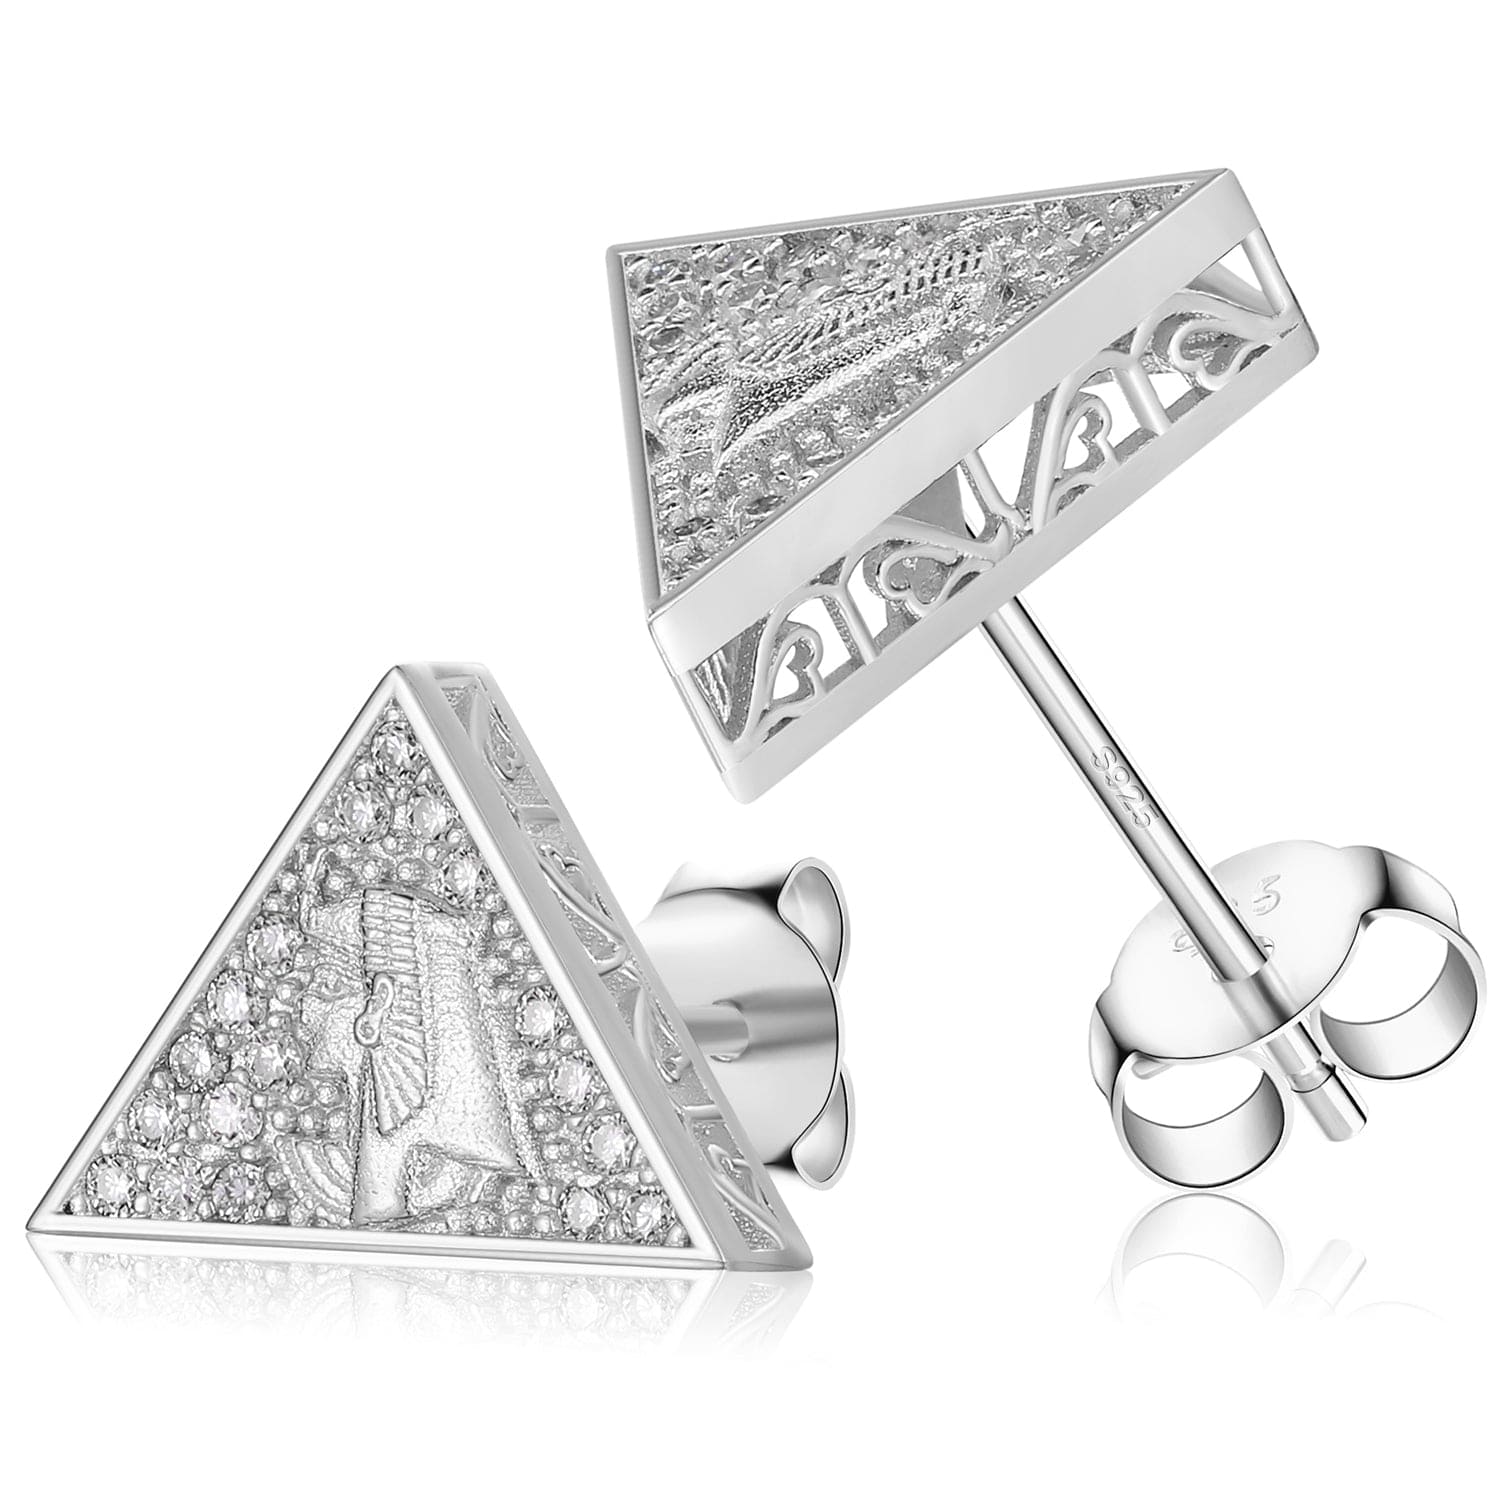 Women's Silver Pyramid Stud Earrings in Sterling Silver by Quince